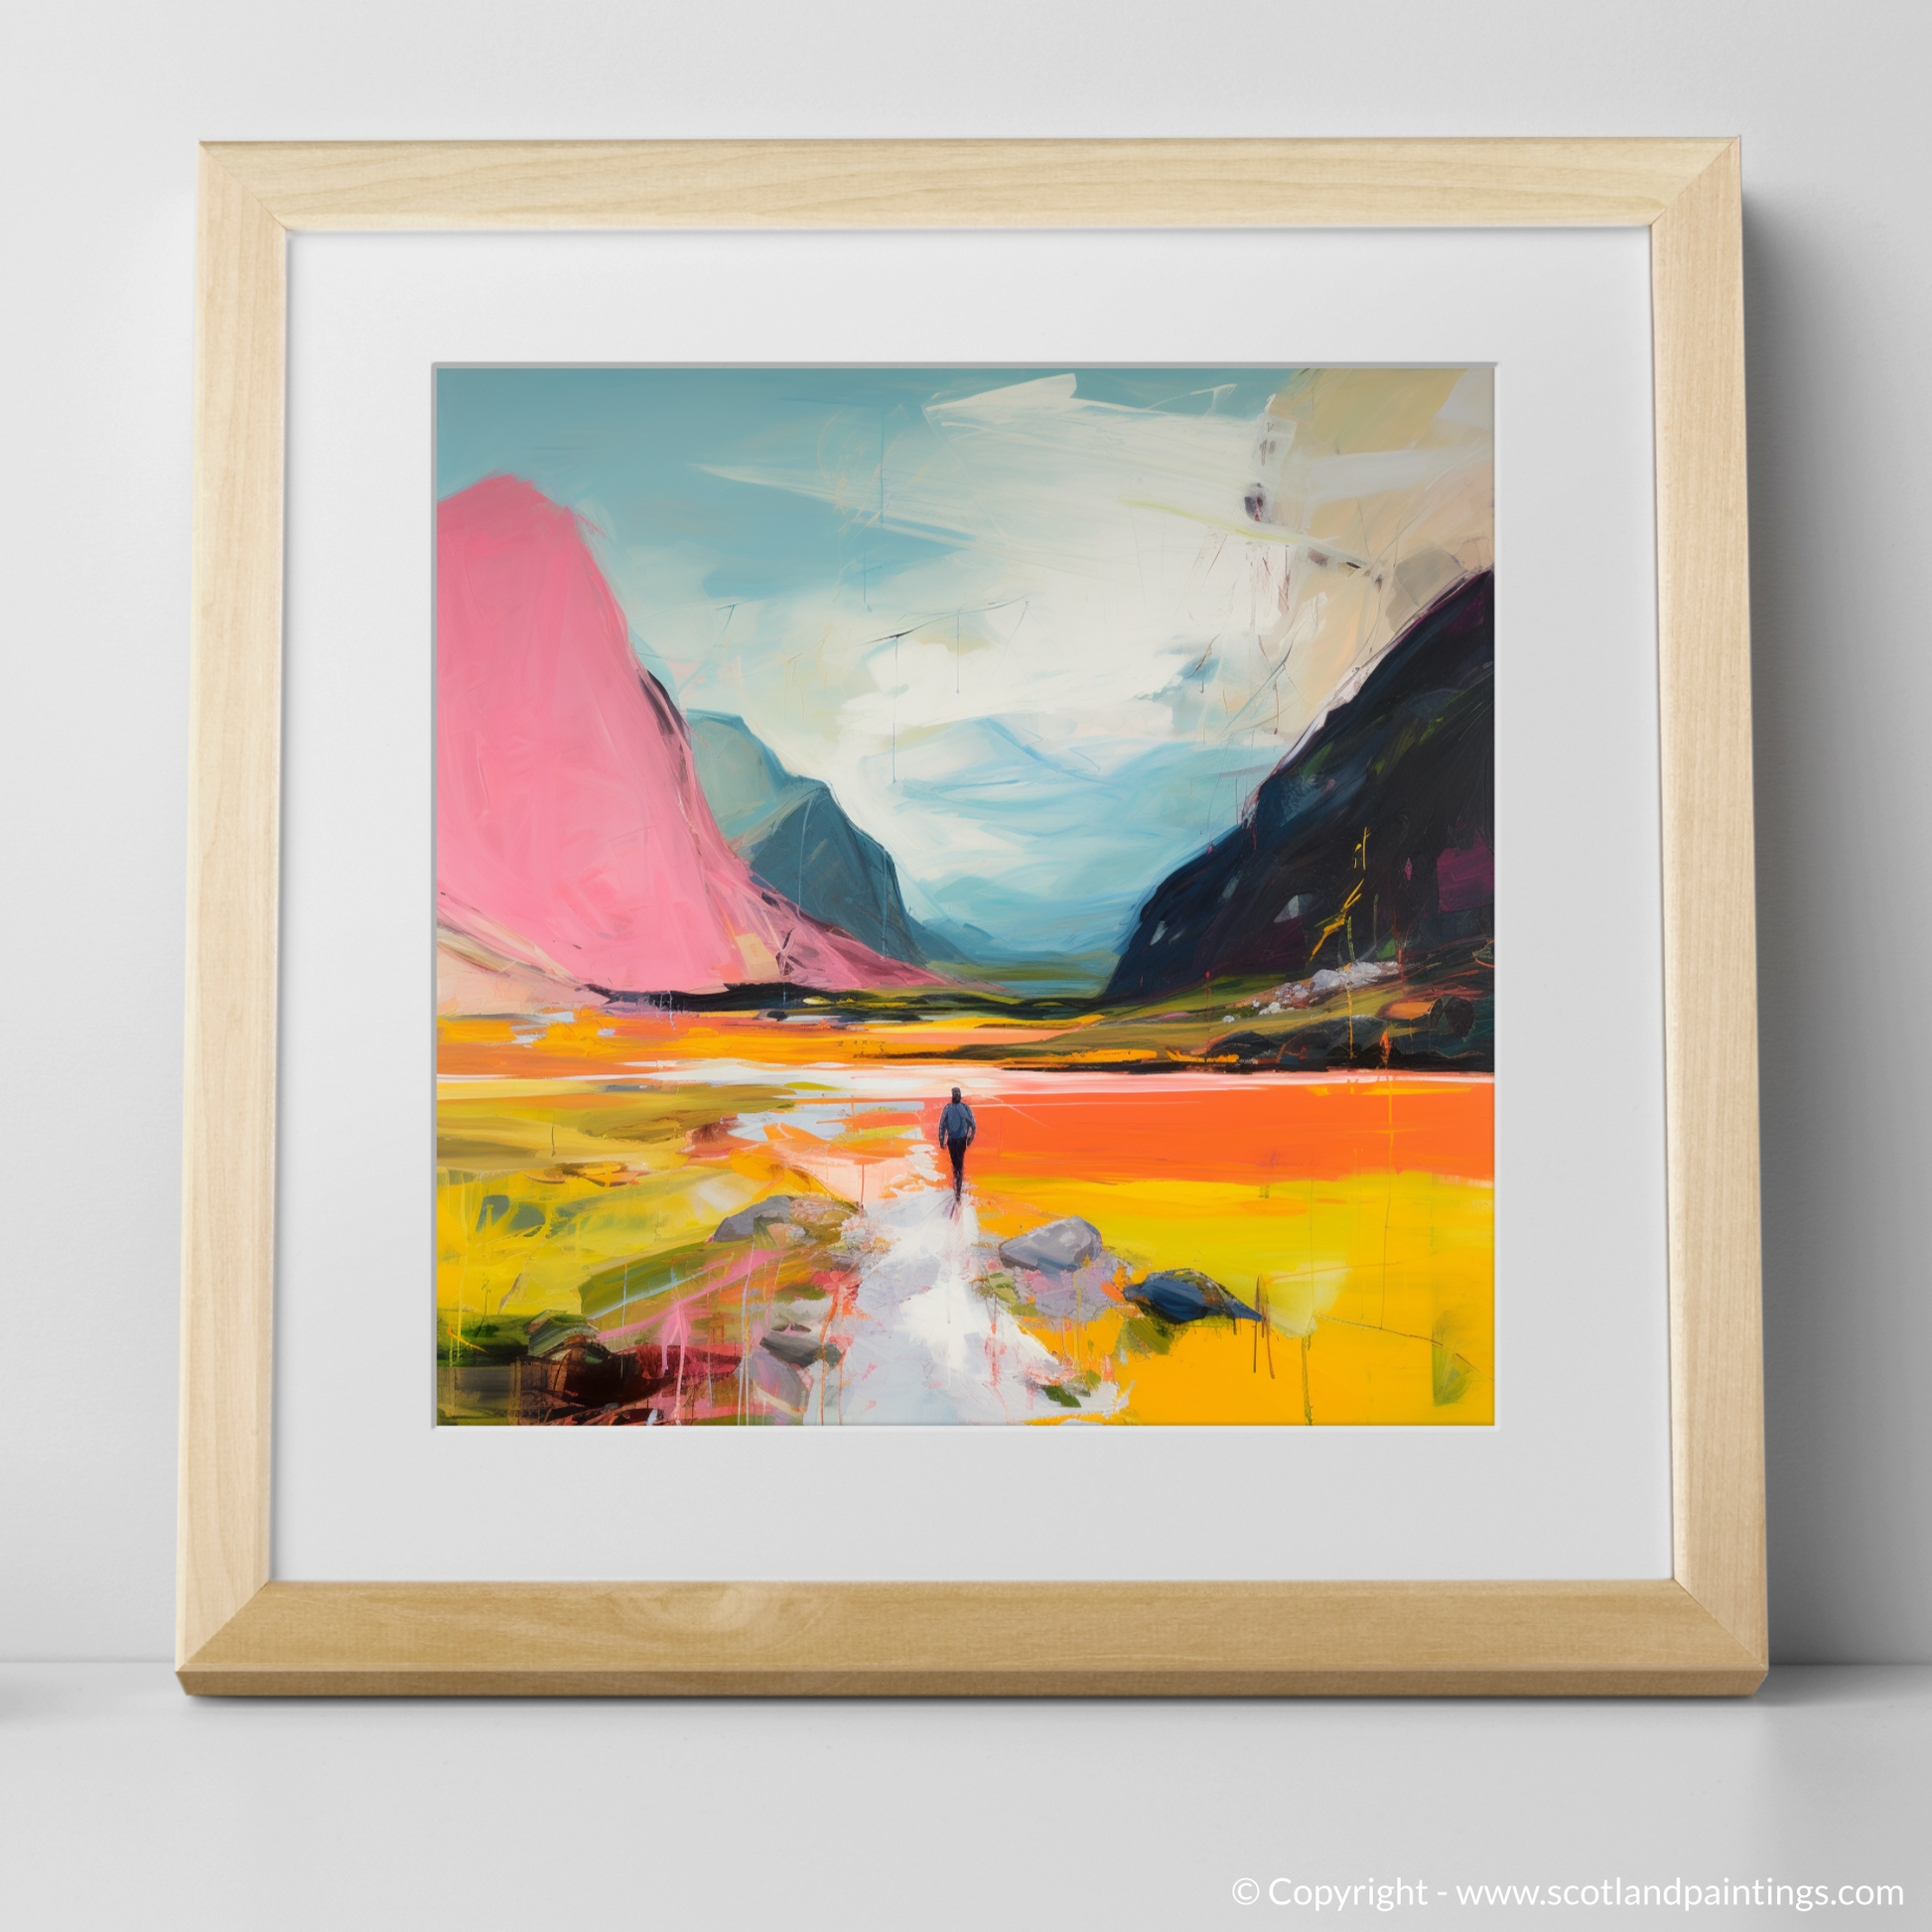 Art Print of Lone hiker in Glencoe during summer with a natural frame